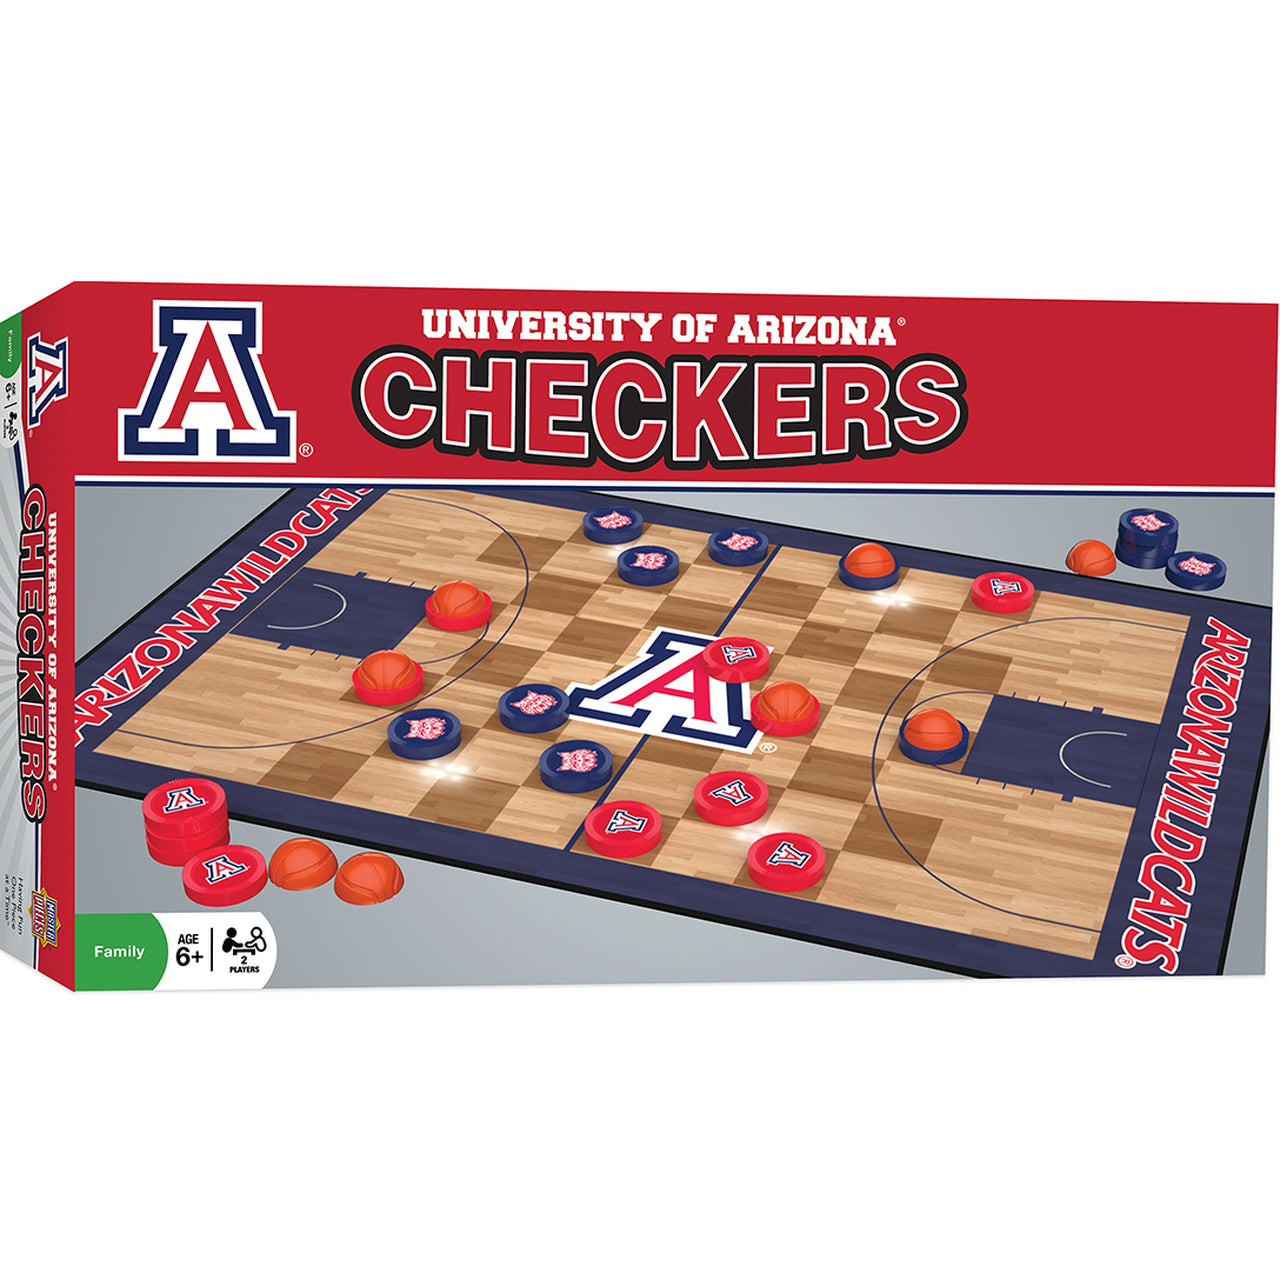 Arizona Wildcats Basketball Checkers Board Game by Masterpieces